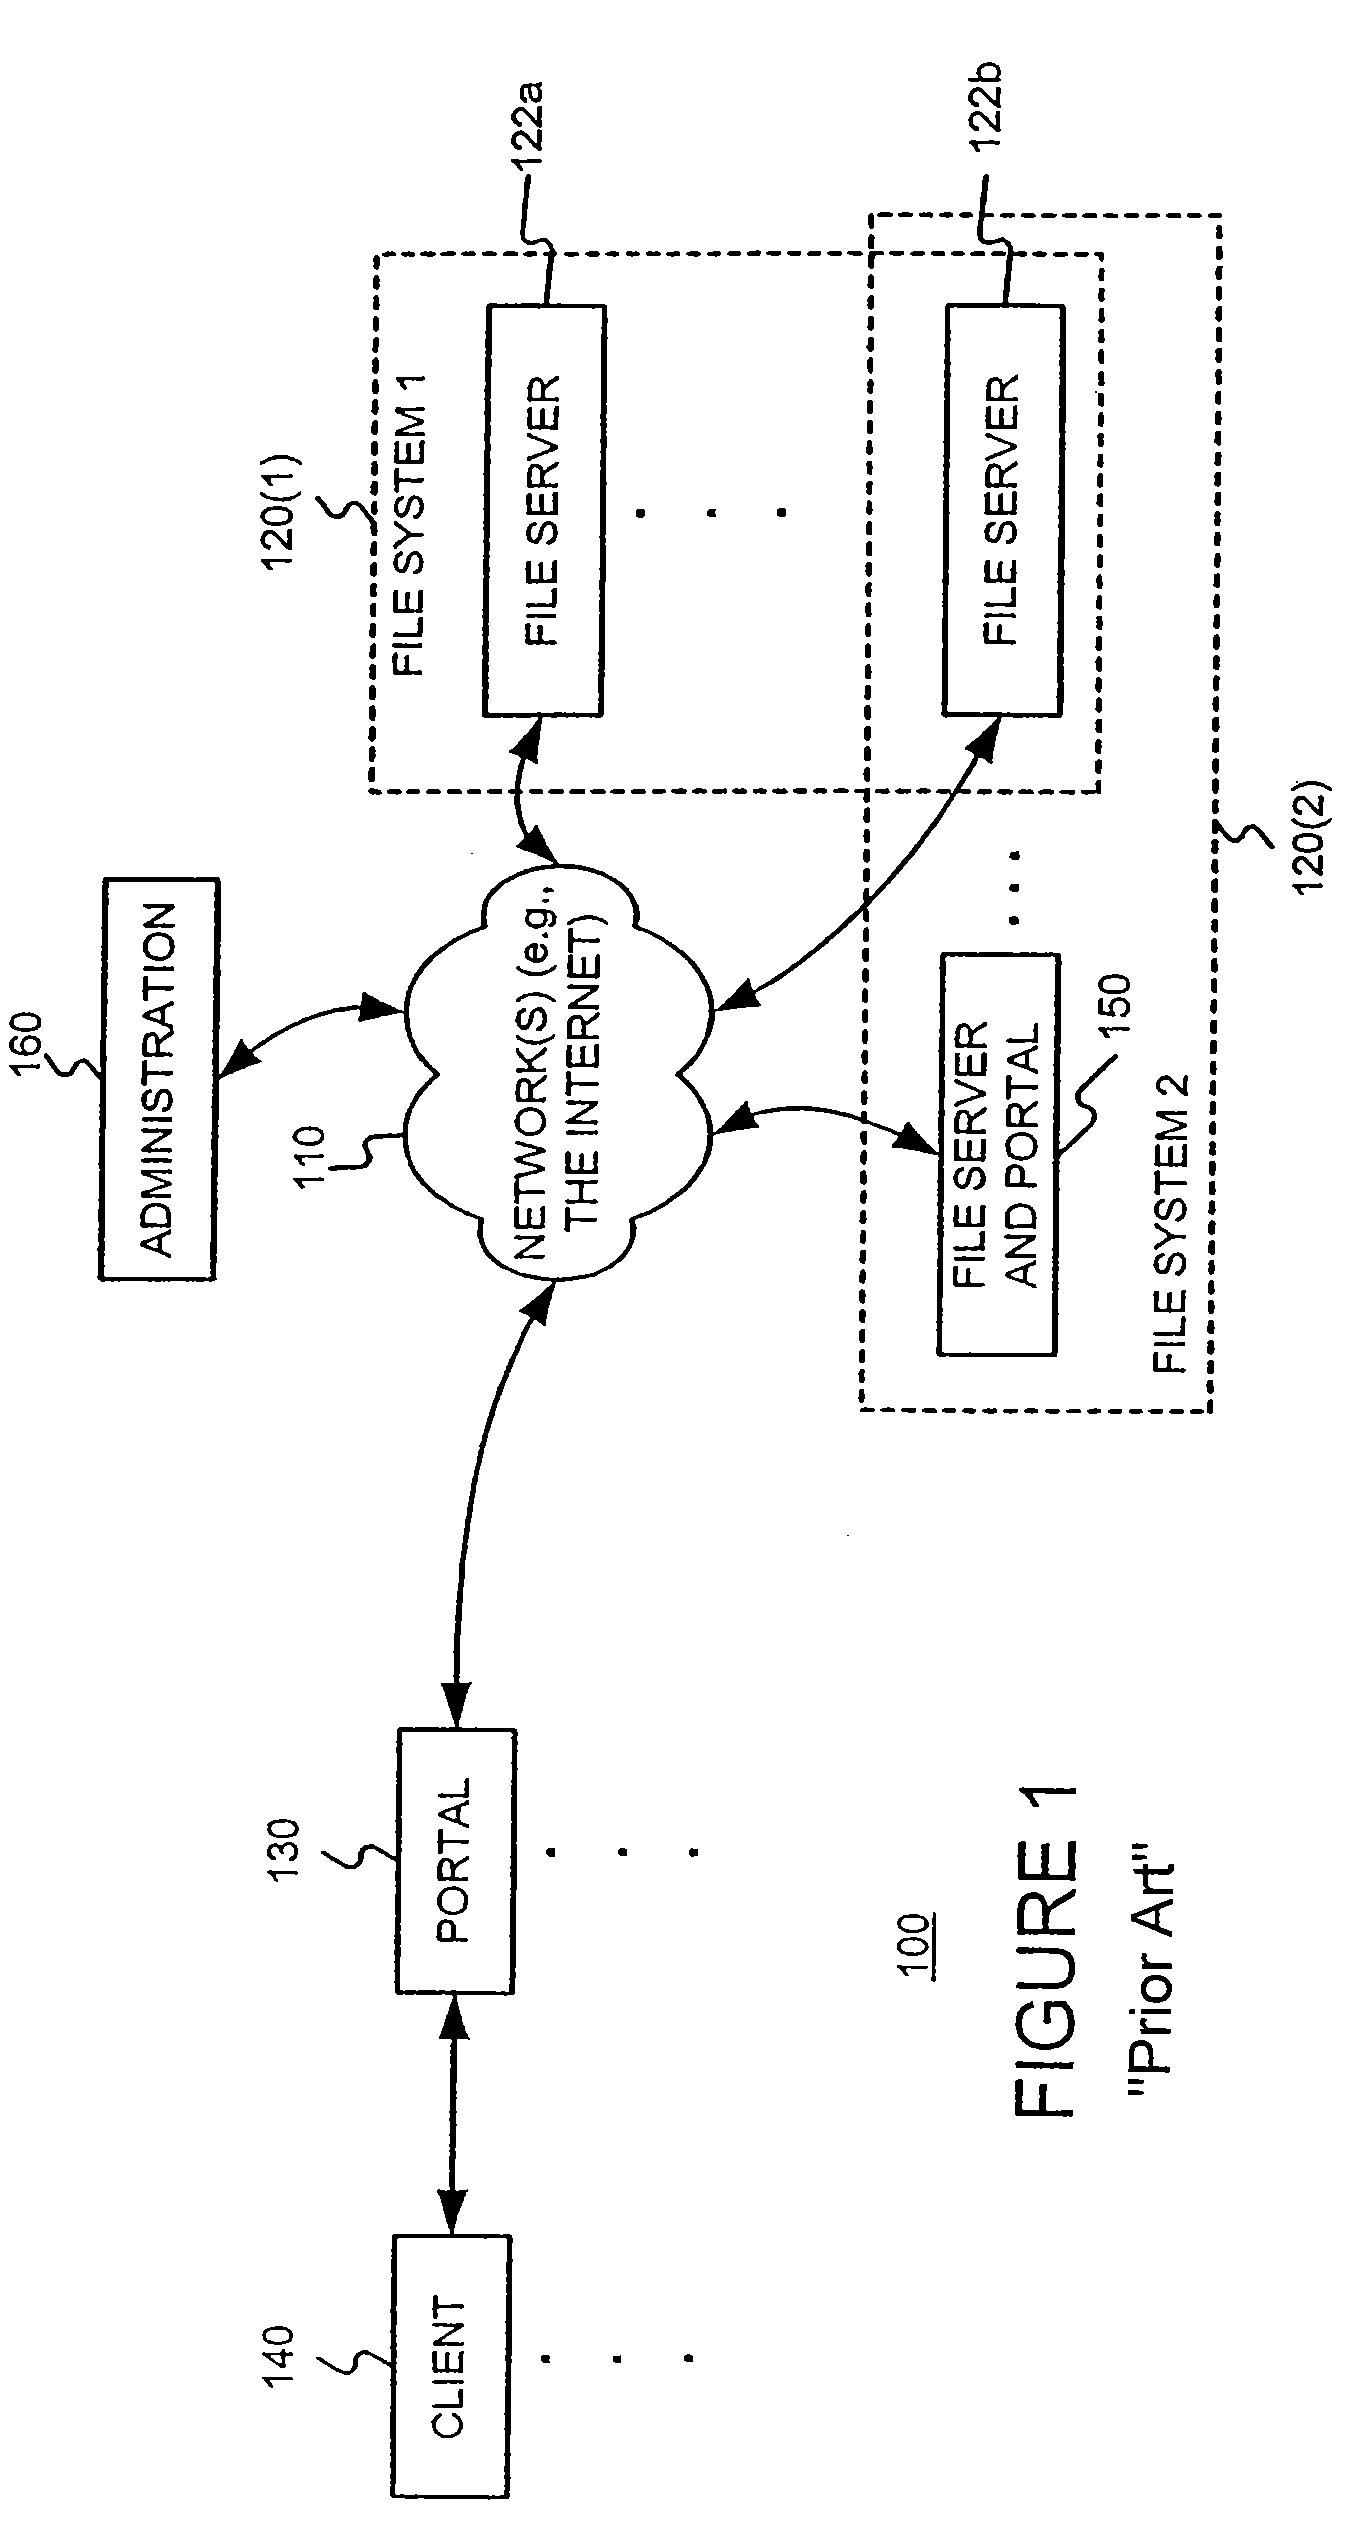 File system consistency checking in a distributed segmented file system